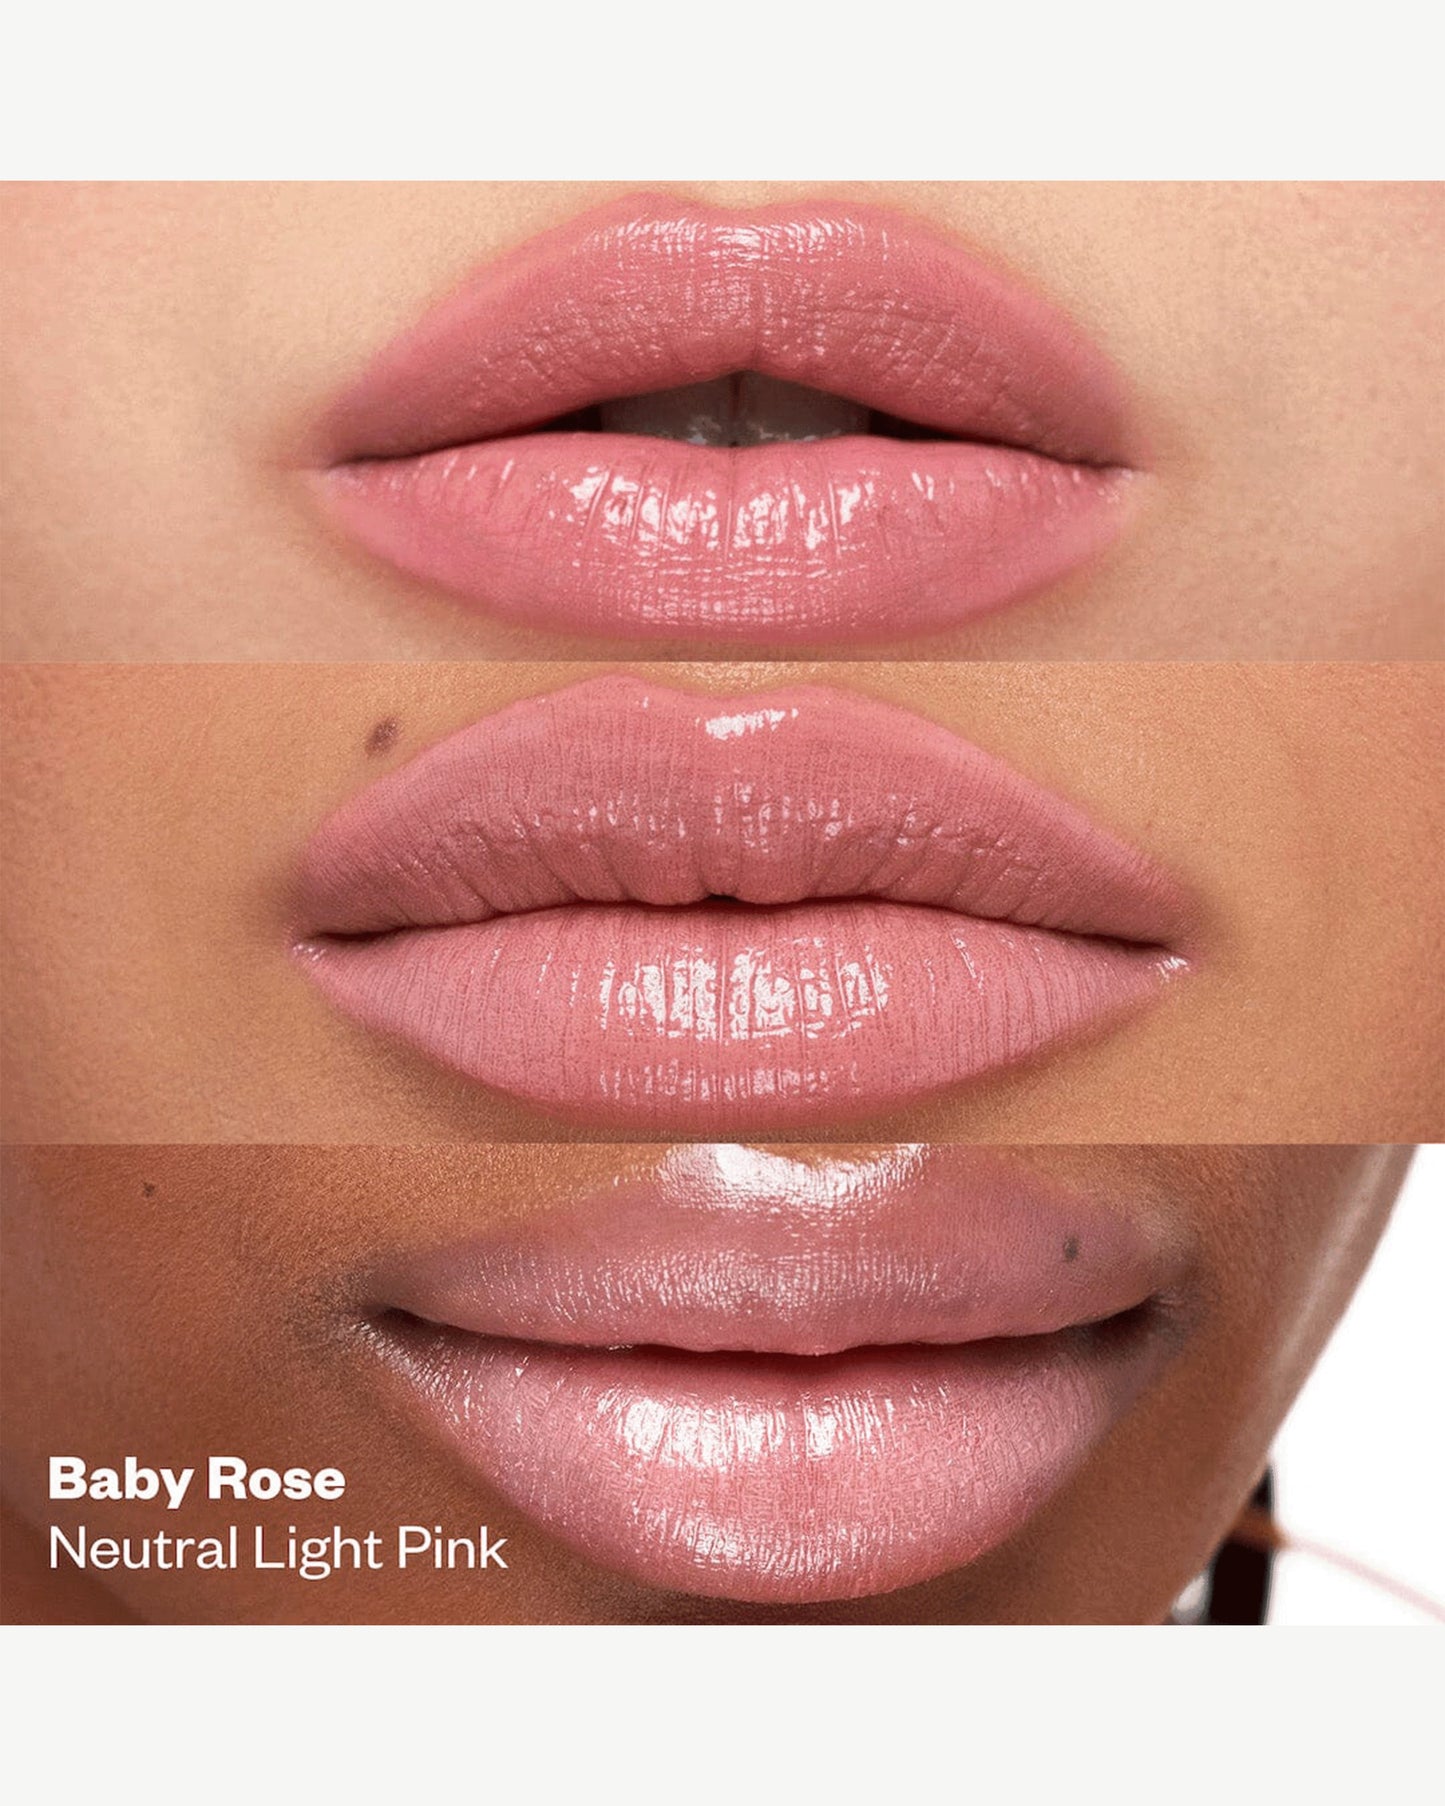 Baby Rose (neutral light pink)